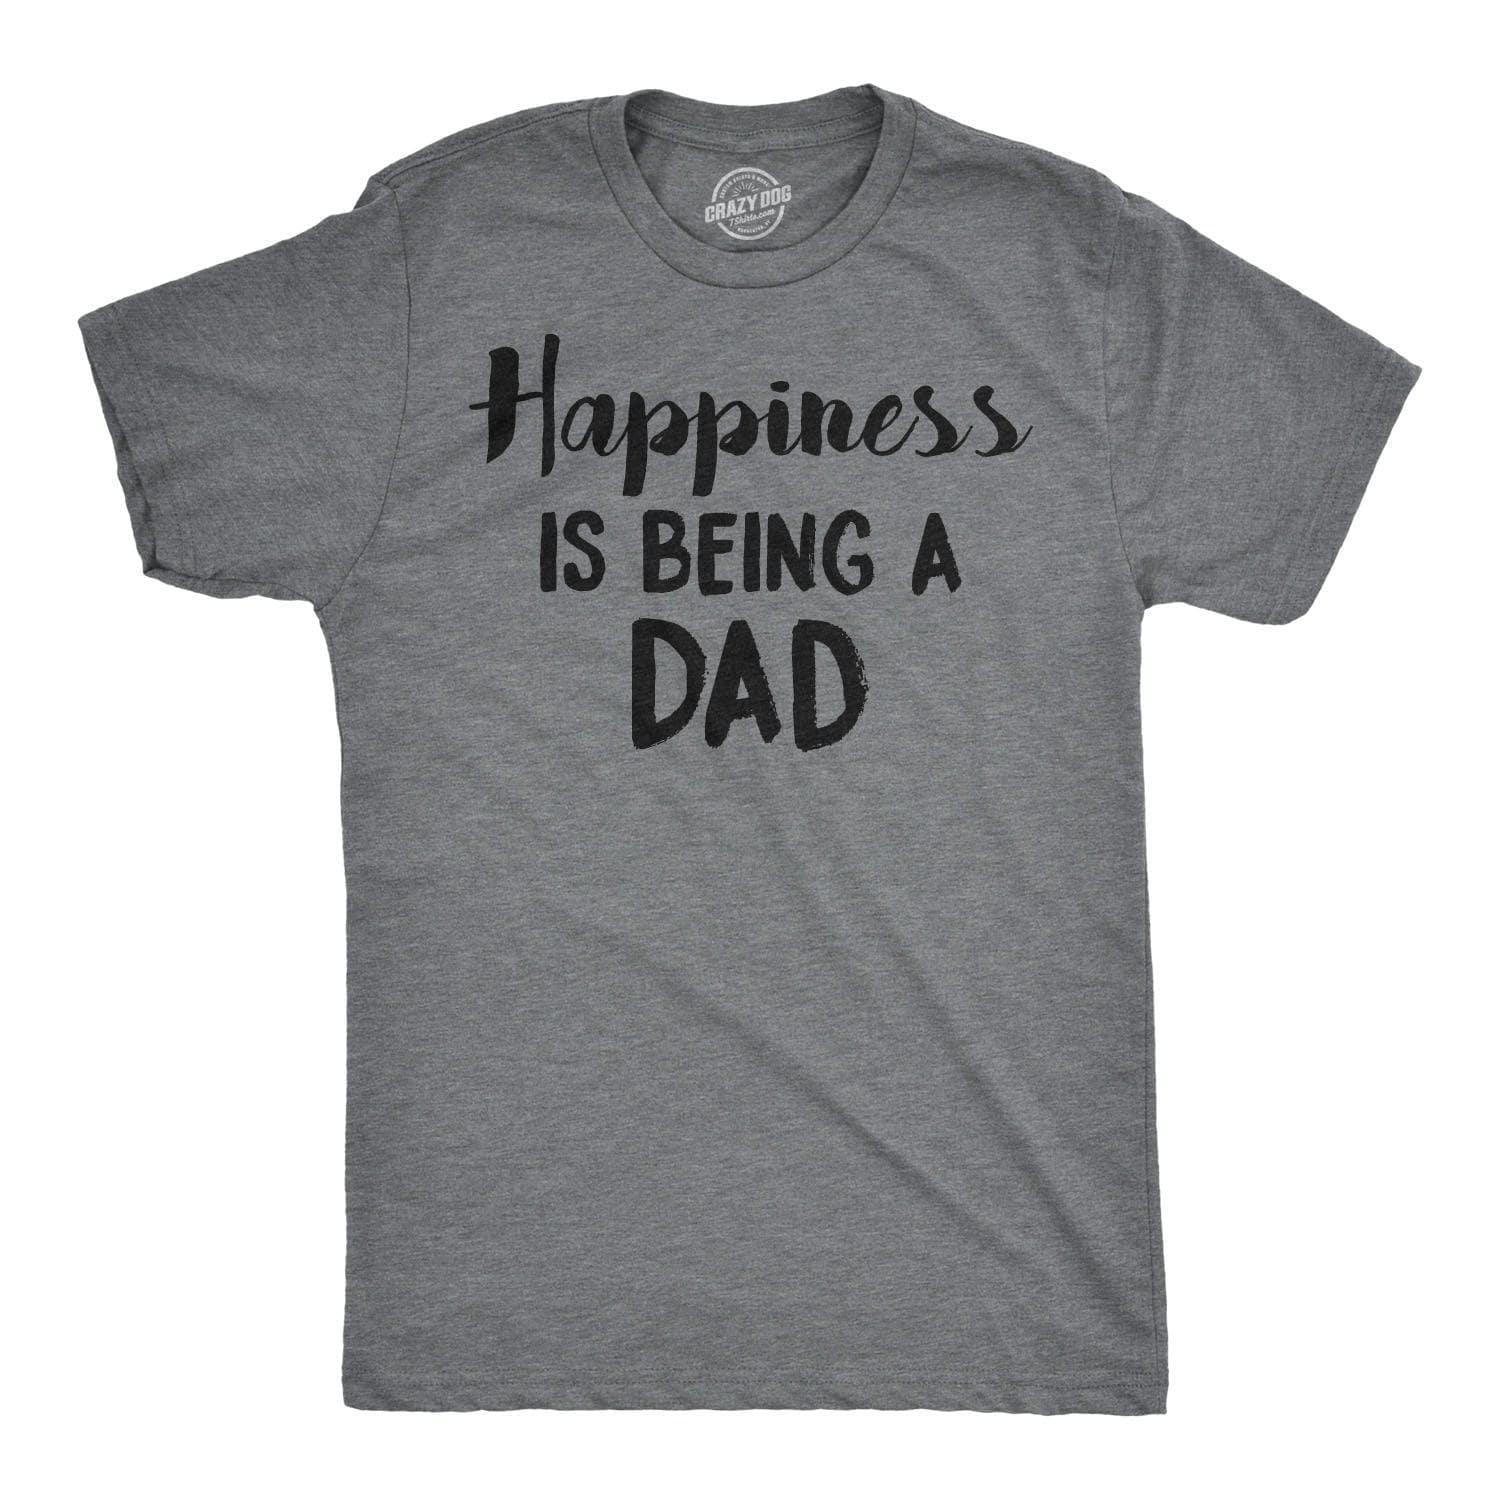 Happiness Is Being a Dad Men's Tshirt  -  Crazy Dog T-Shirts